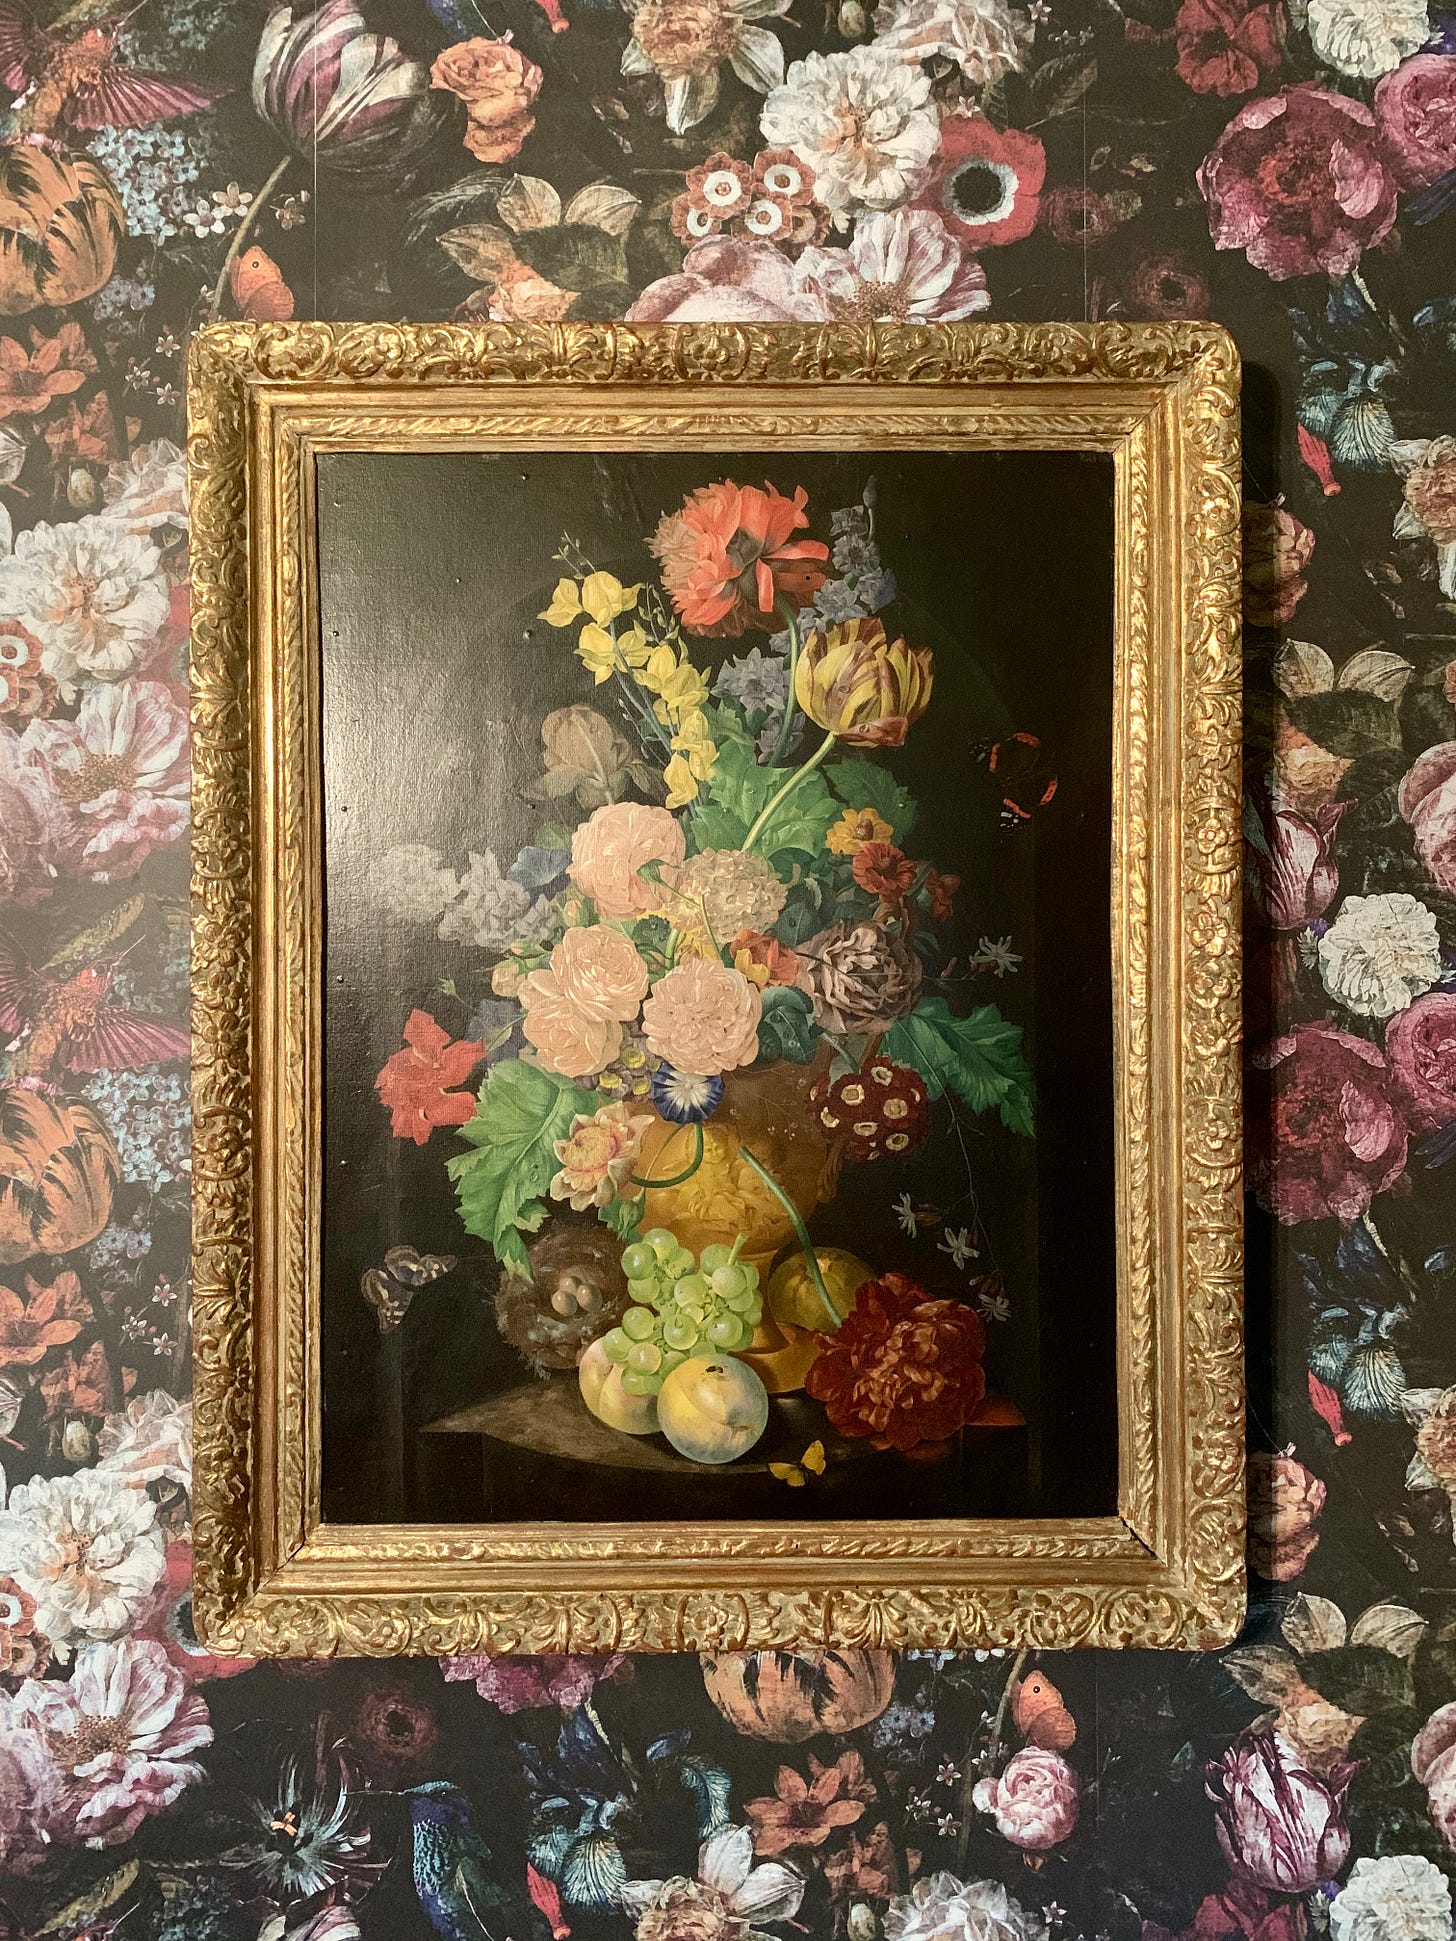 A floral still life in a gold frame hung on floral wallpaper